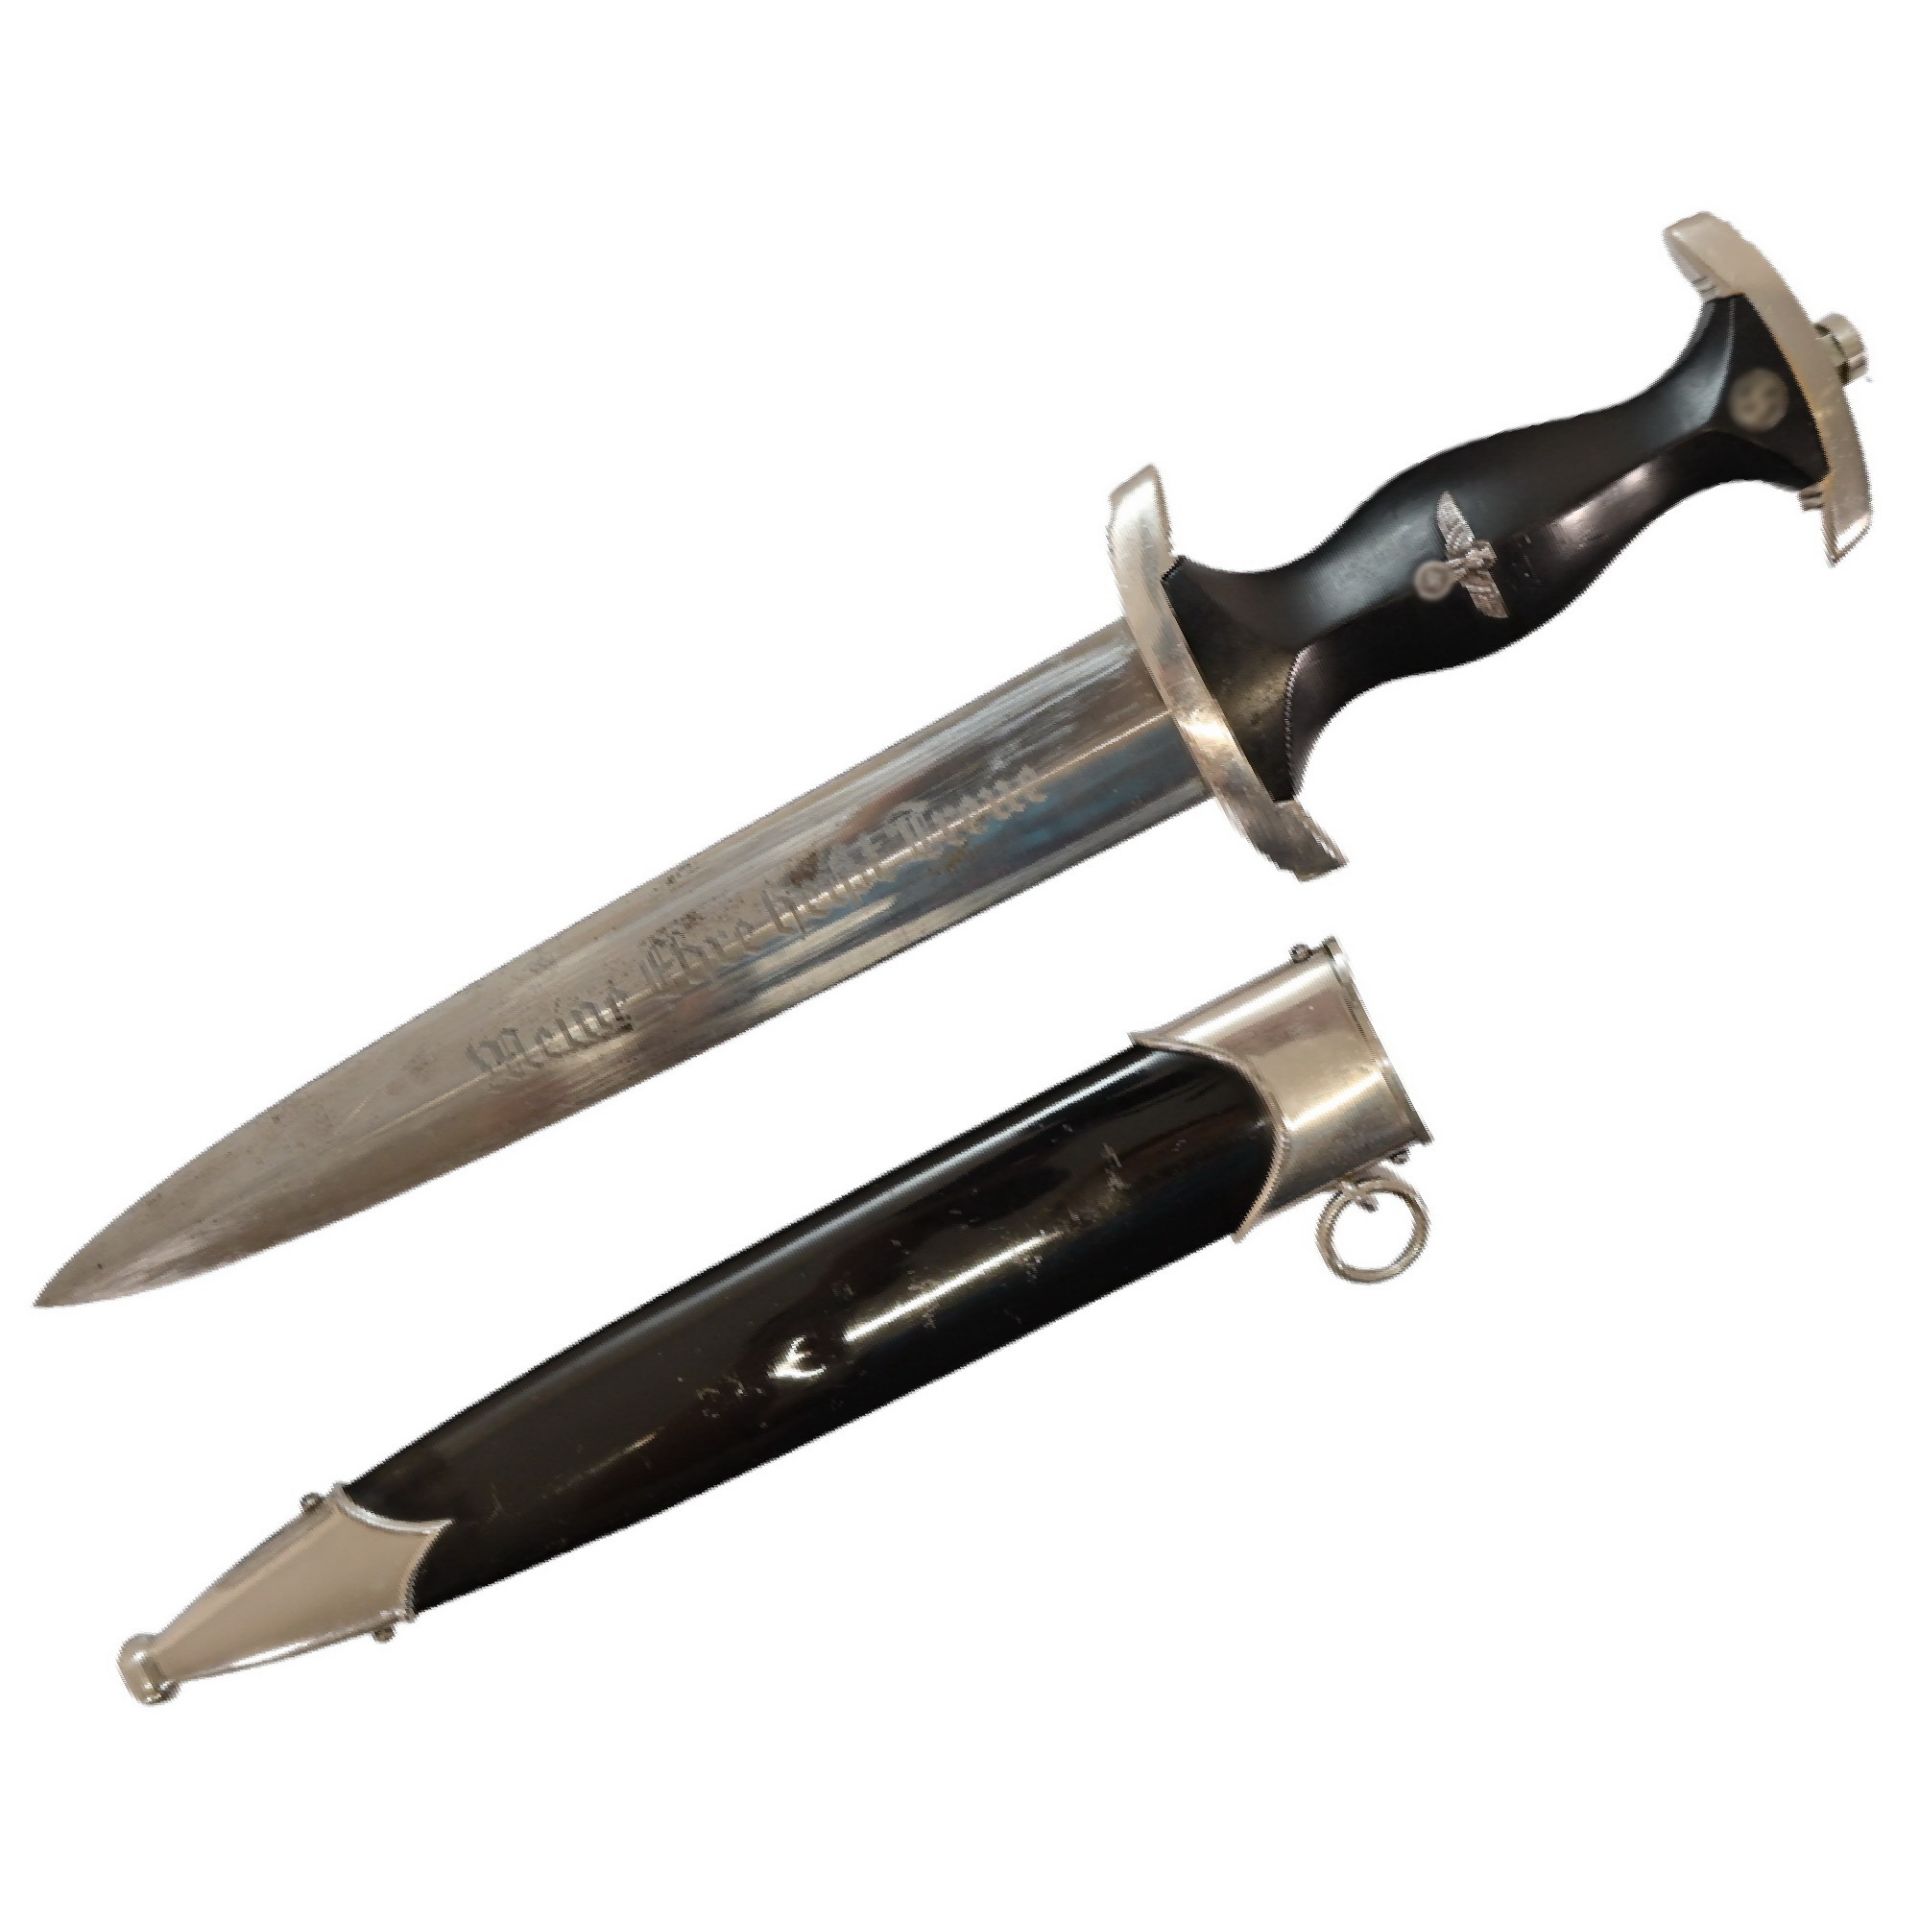 Nice WWII German SS Dagger with scabbard.